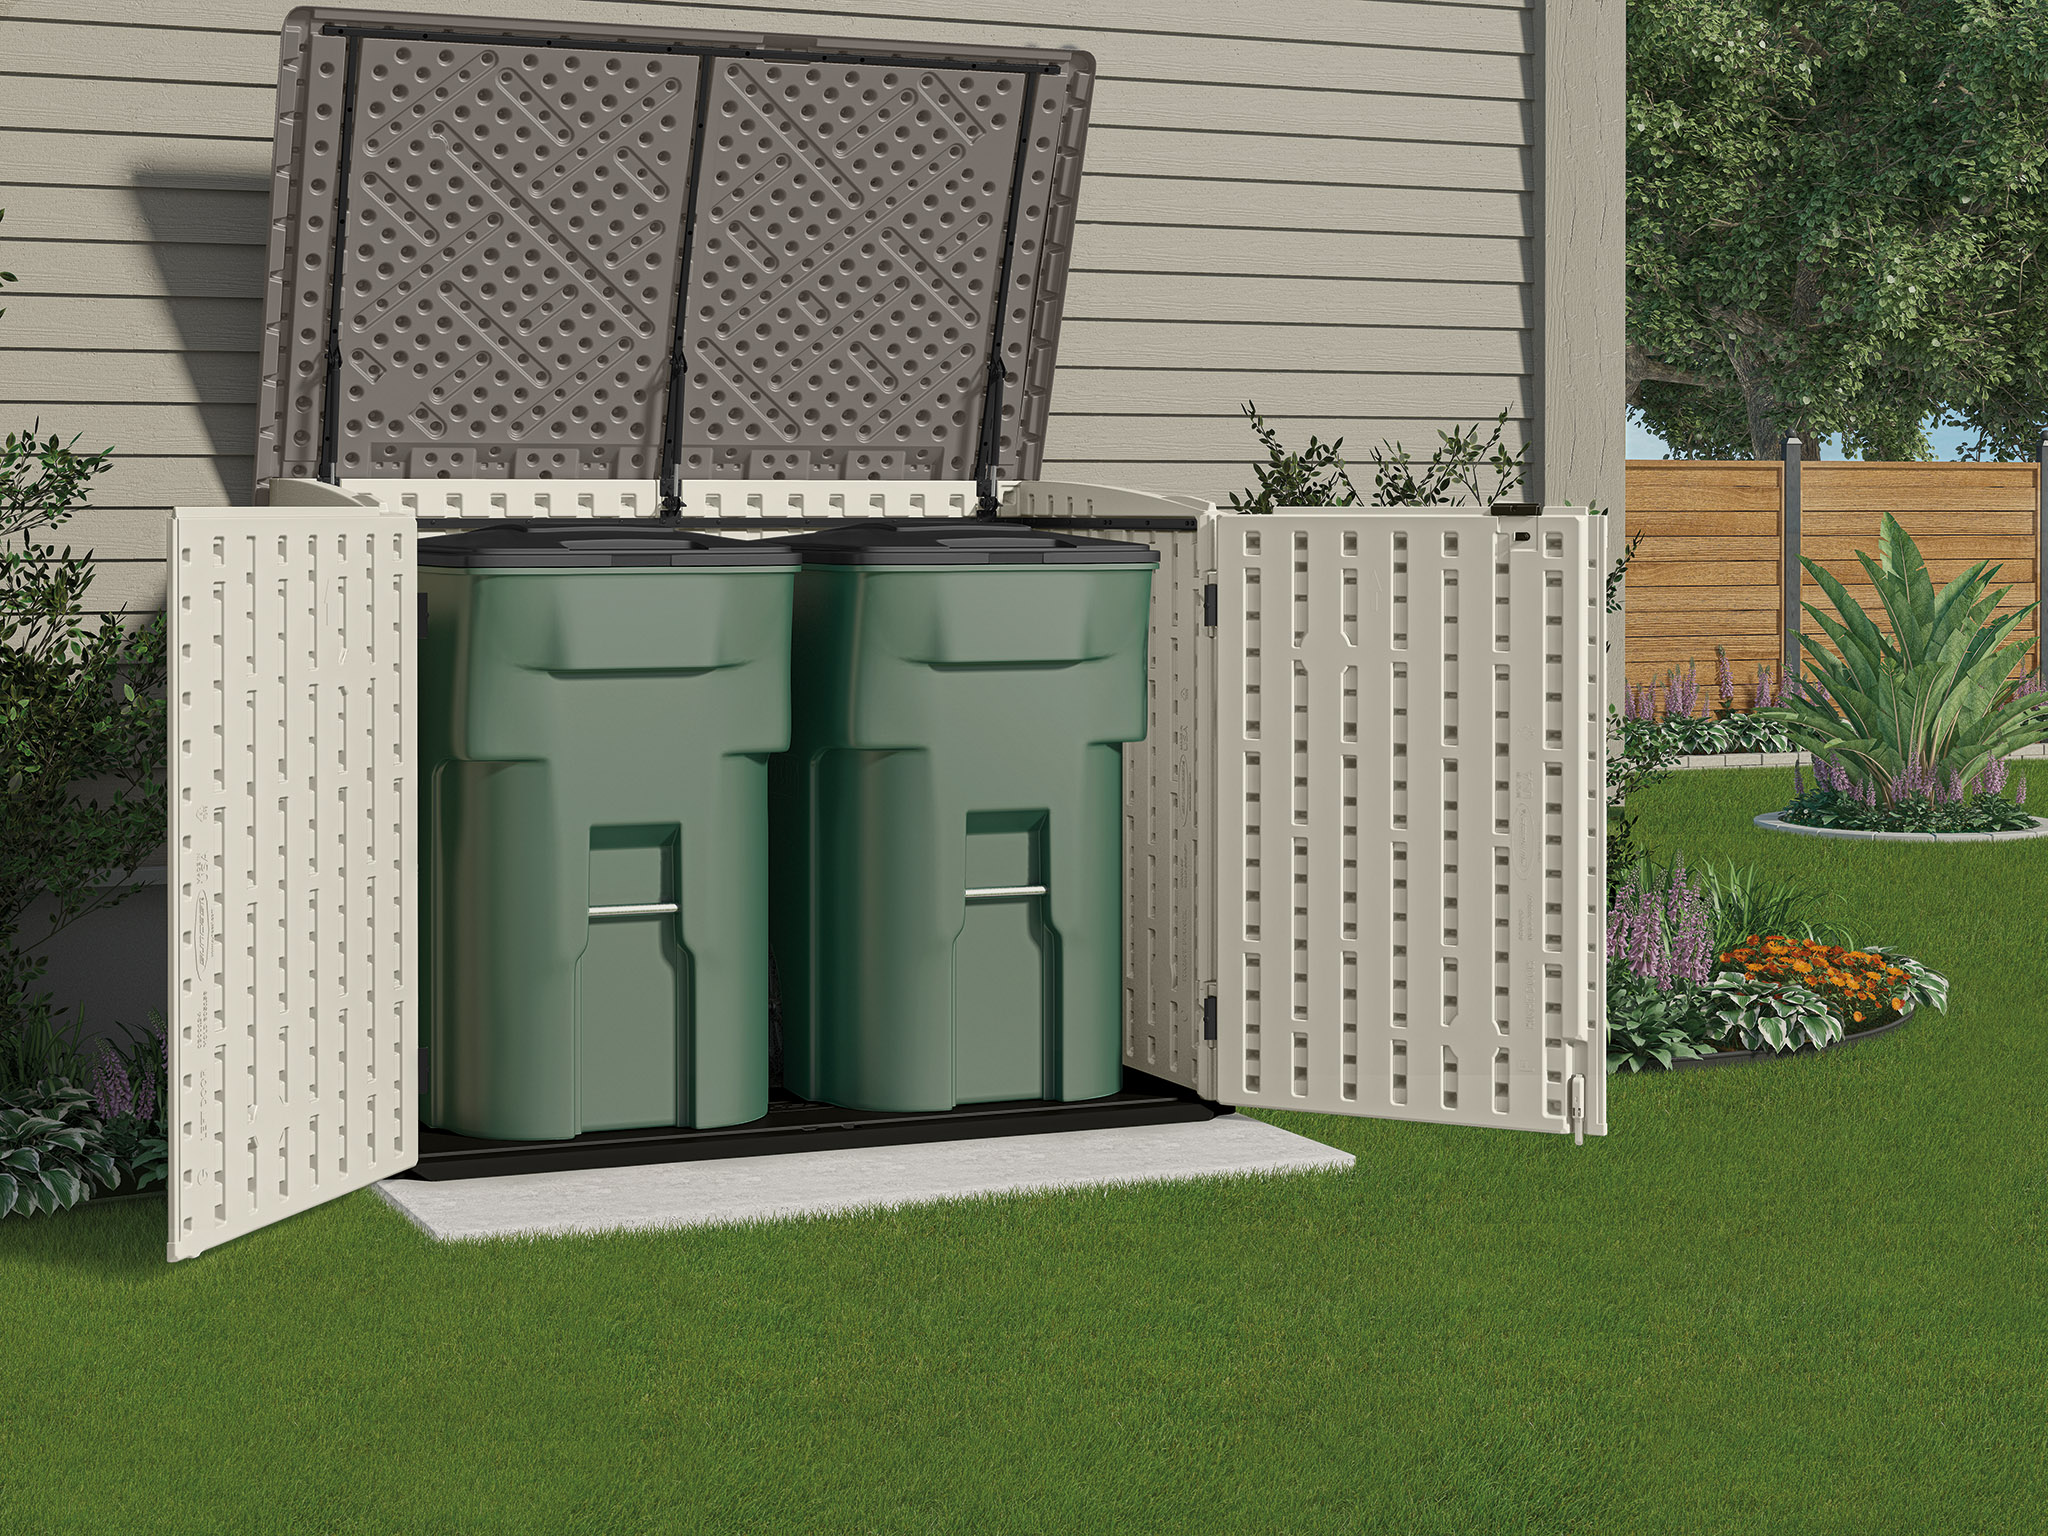 Suncast Plastic Storage Shed, Off-White and Gray, 44.25 in D x 52 in H x 70.5 in W - image 3 of 7